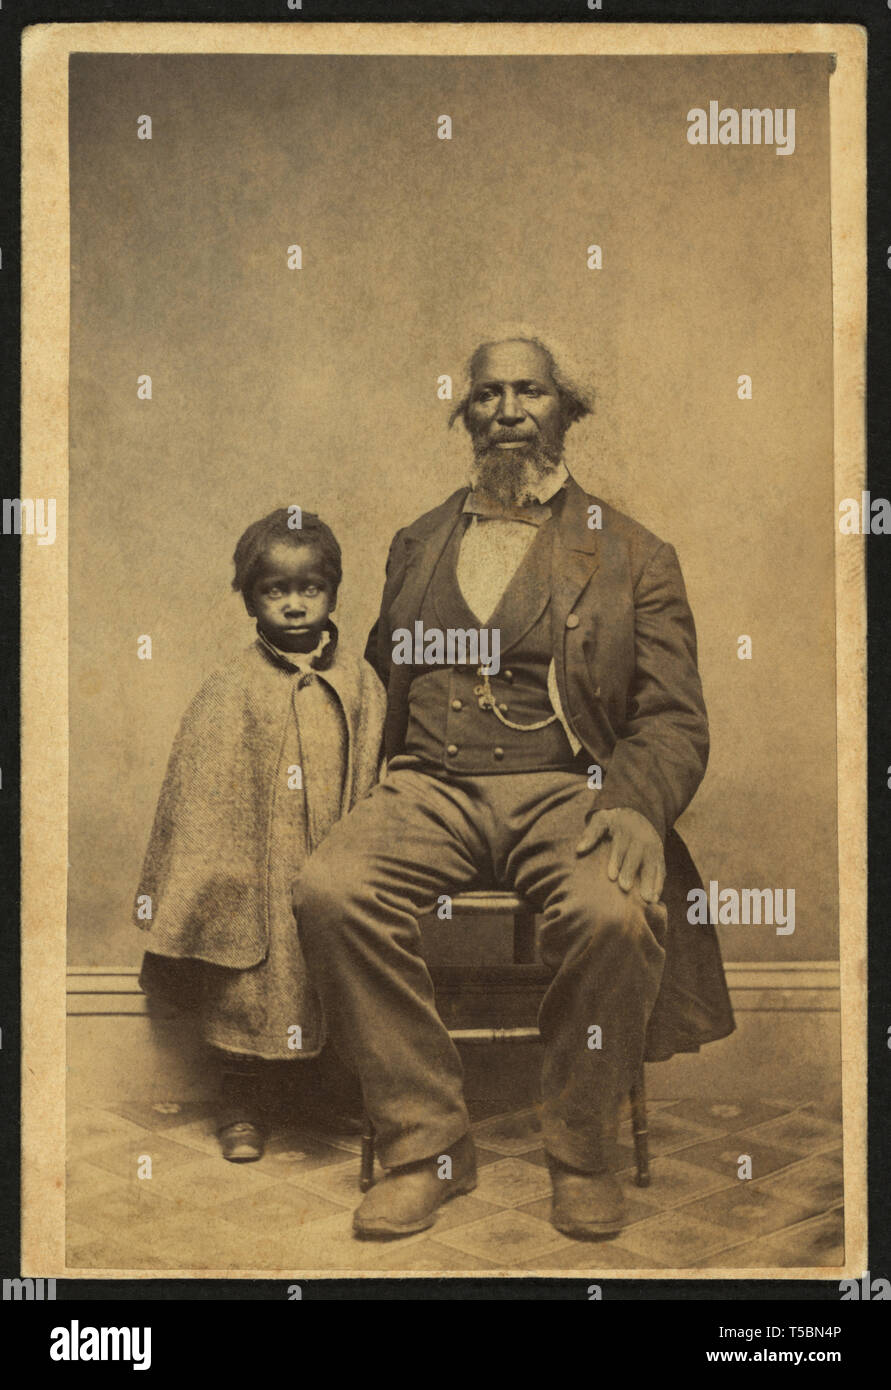 African American Man and Child, Full-length Portrait, by Bundy & Williams, William A. Gladstone Collection of African American Photographs, 1860's Stock Photo